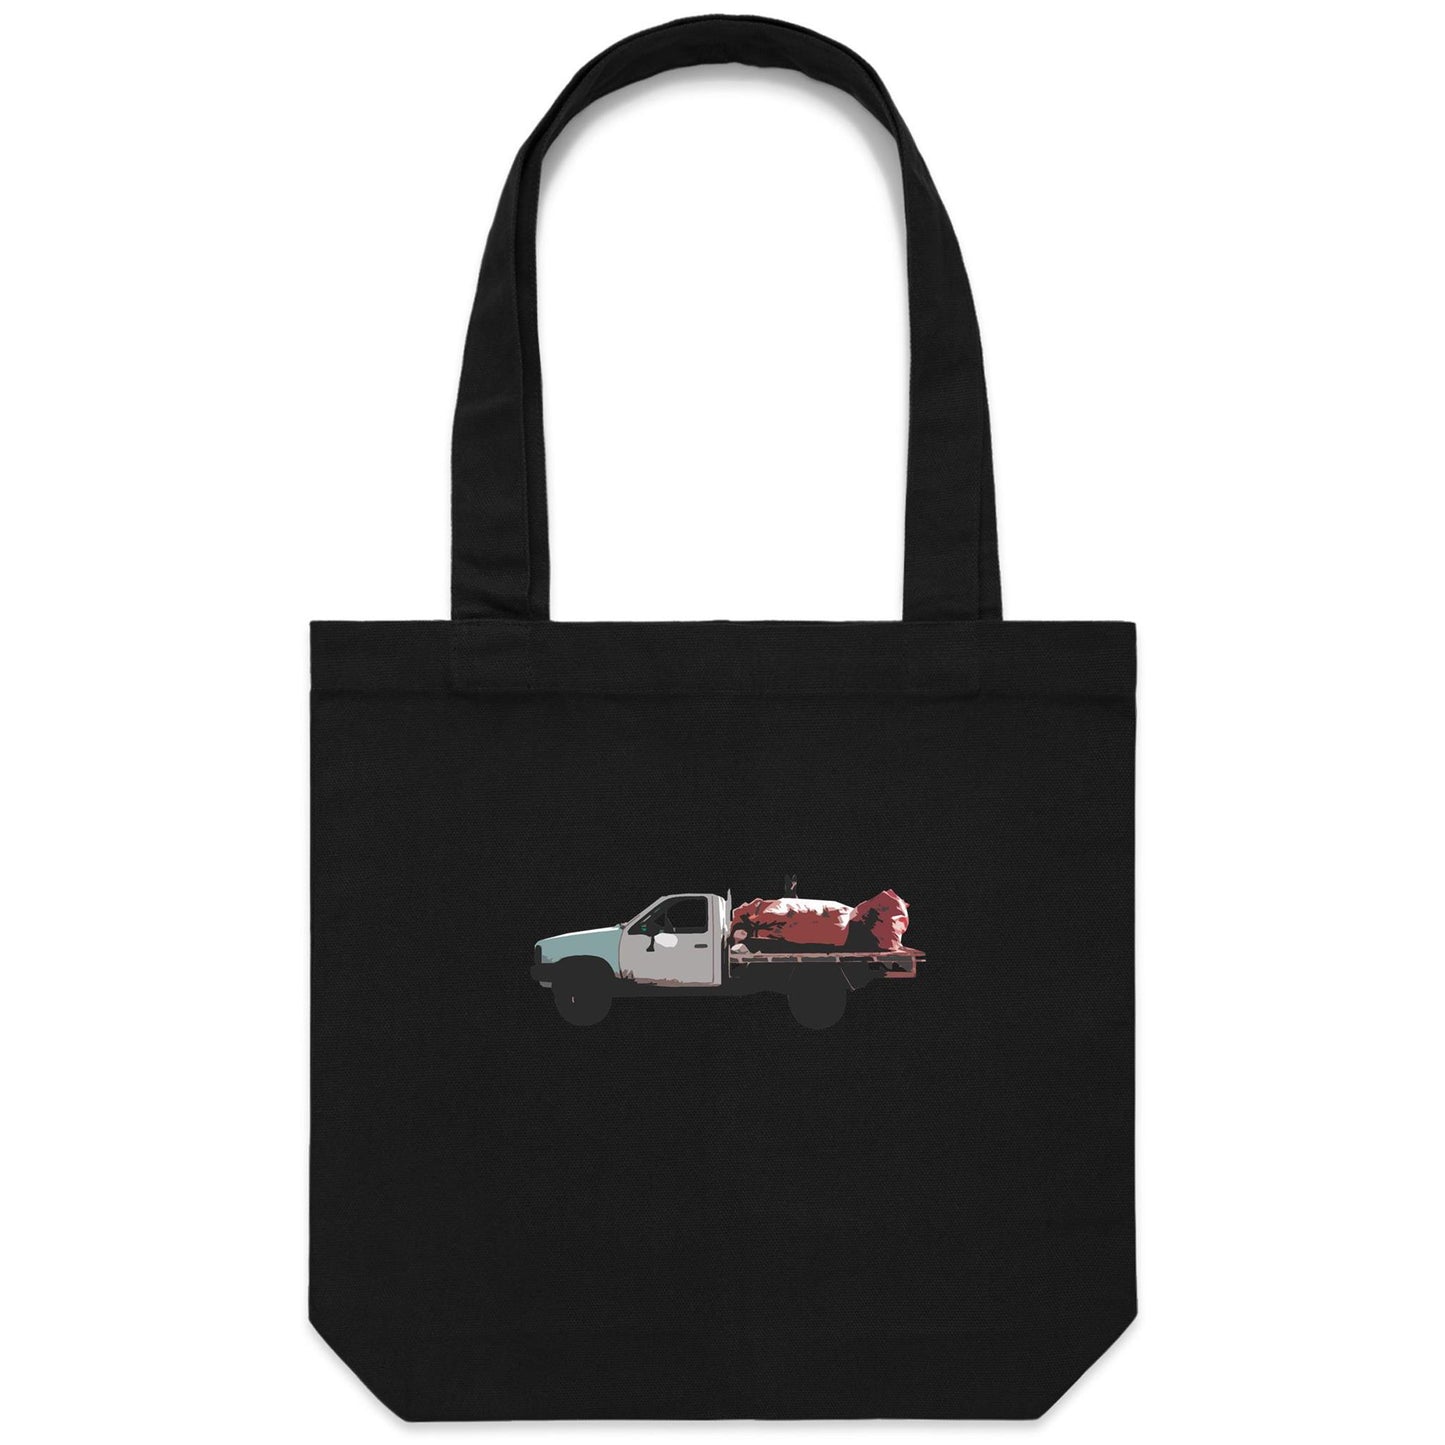 Ute Dog Canvas Totes